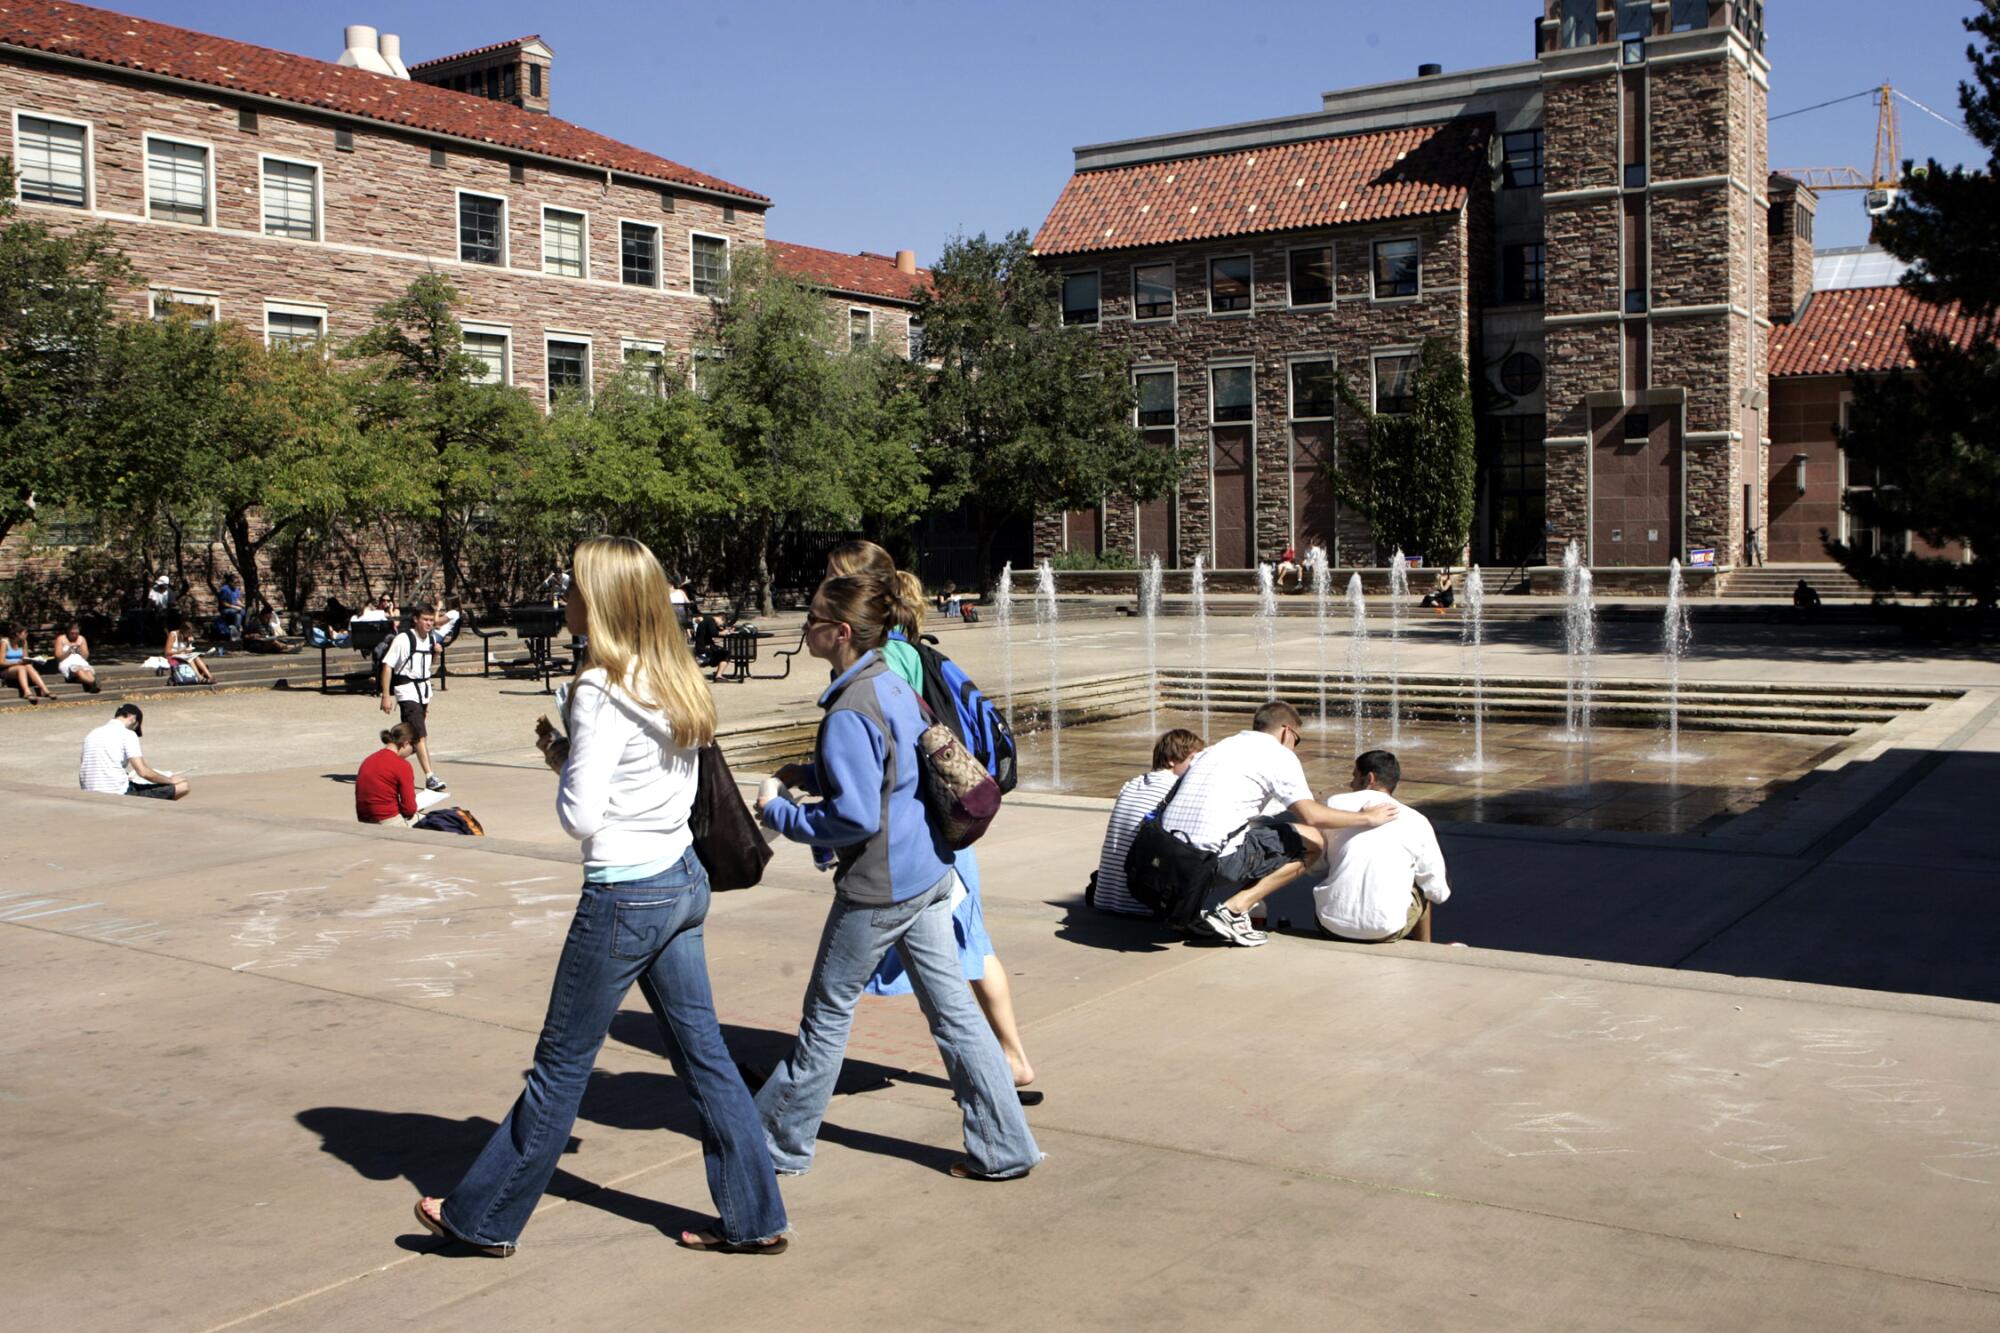 Students share a common area at the University of Colorado.